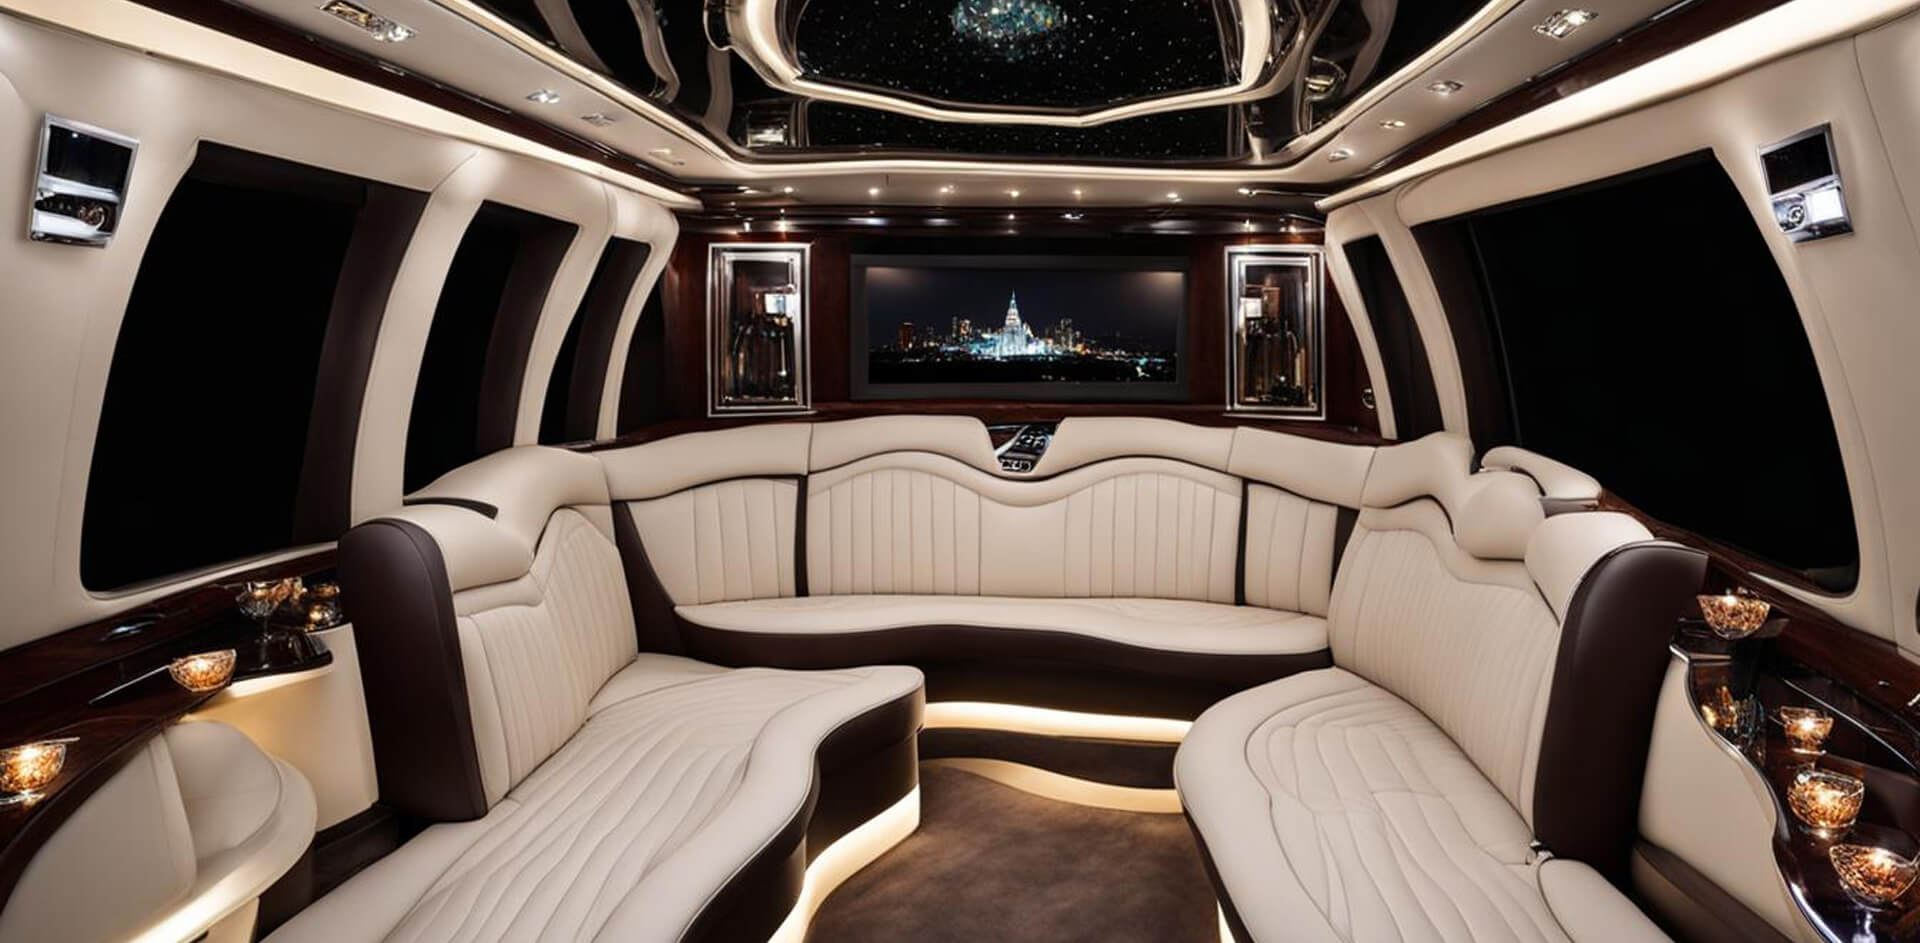 Plush Interior of Fountain Hills Limo Service Vehicle